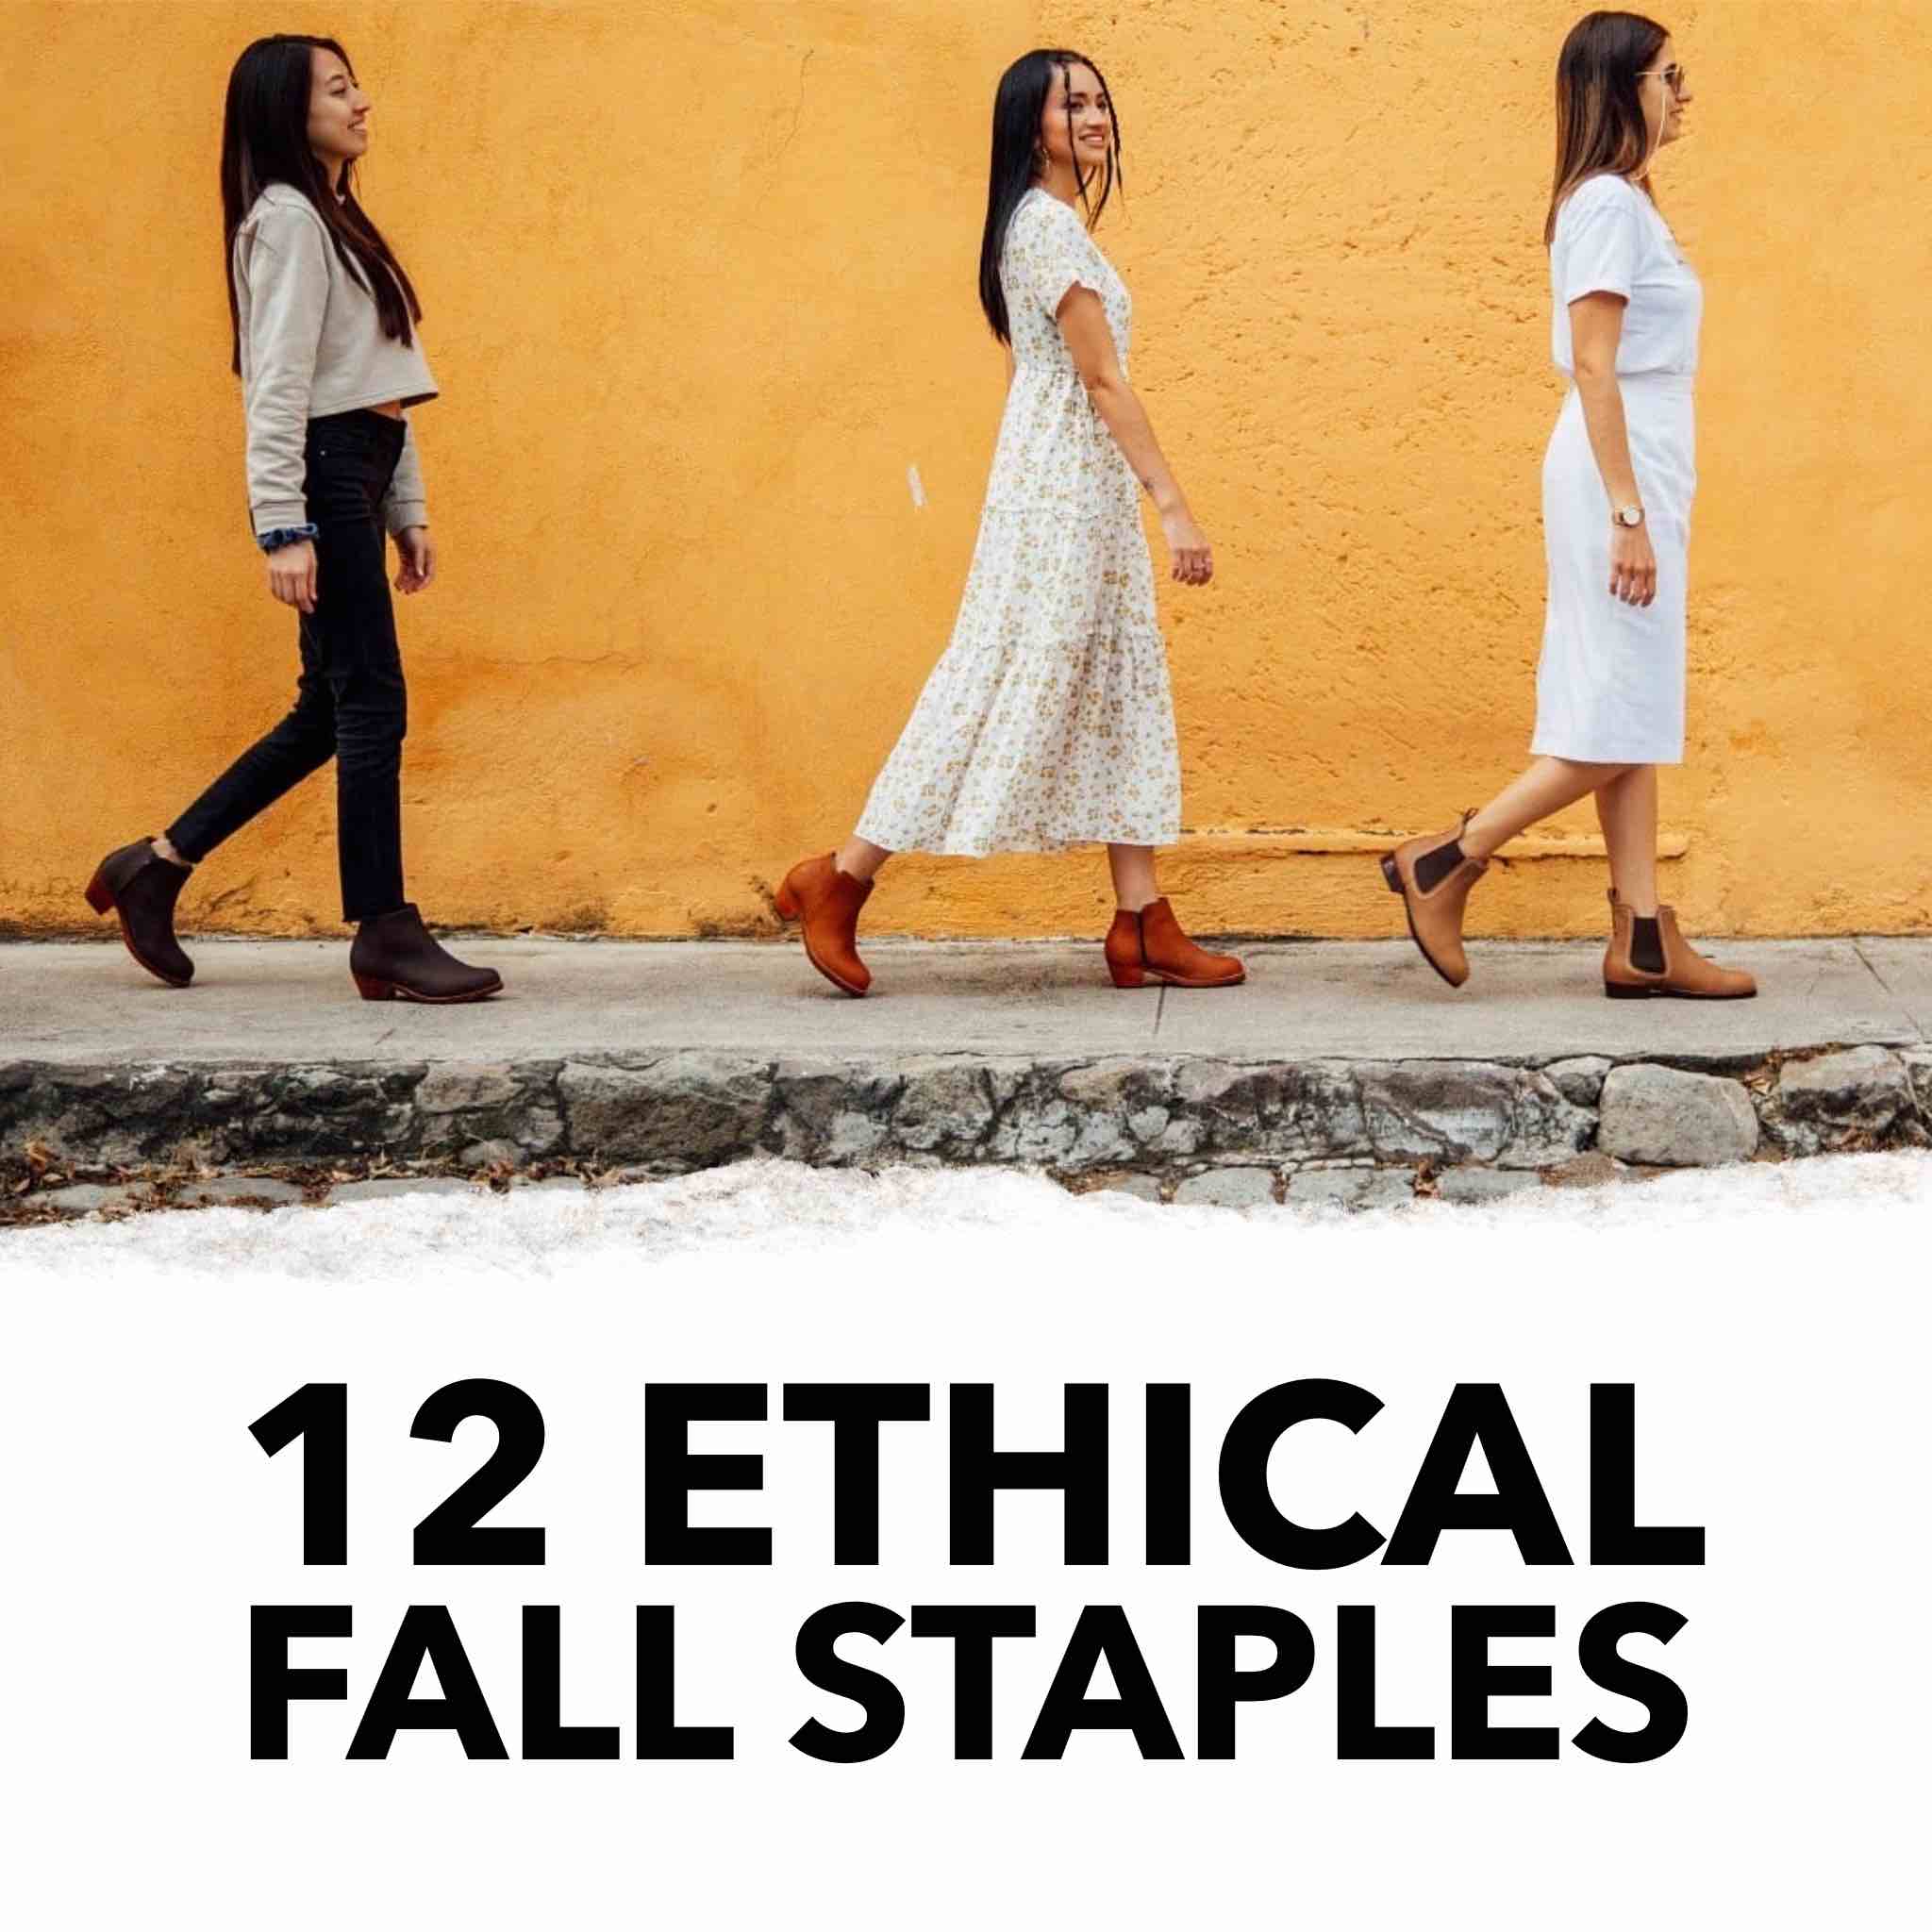 12 Ethical Fall Staples for Her